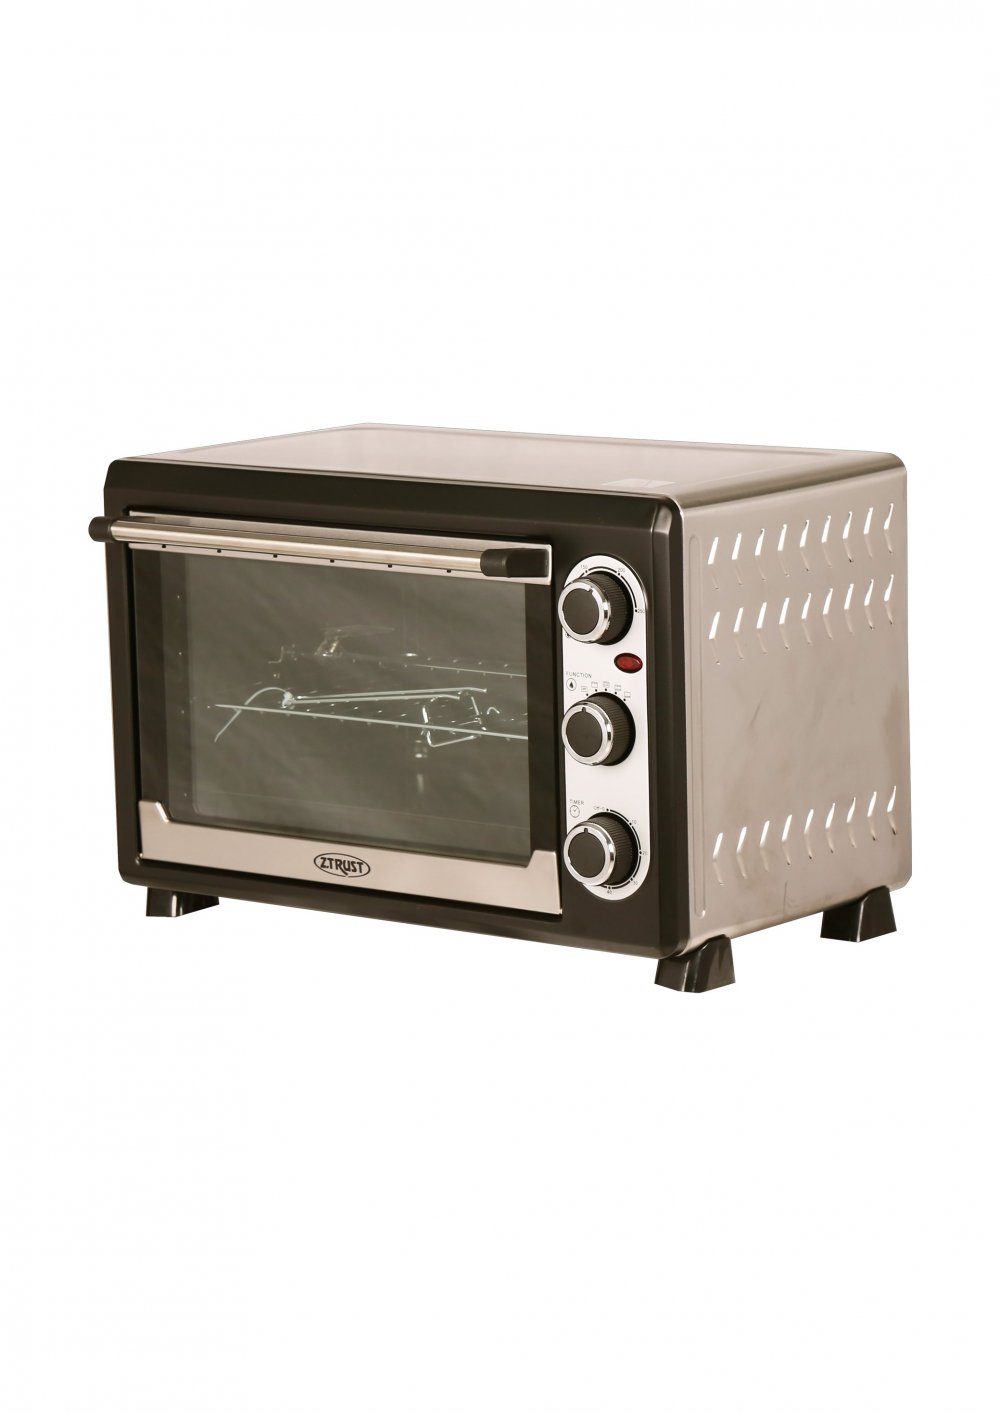 Electric Oven 26 Litter